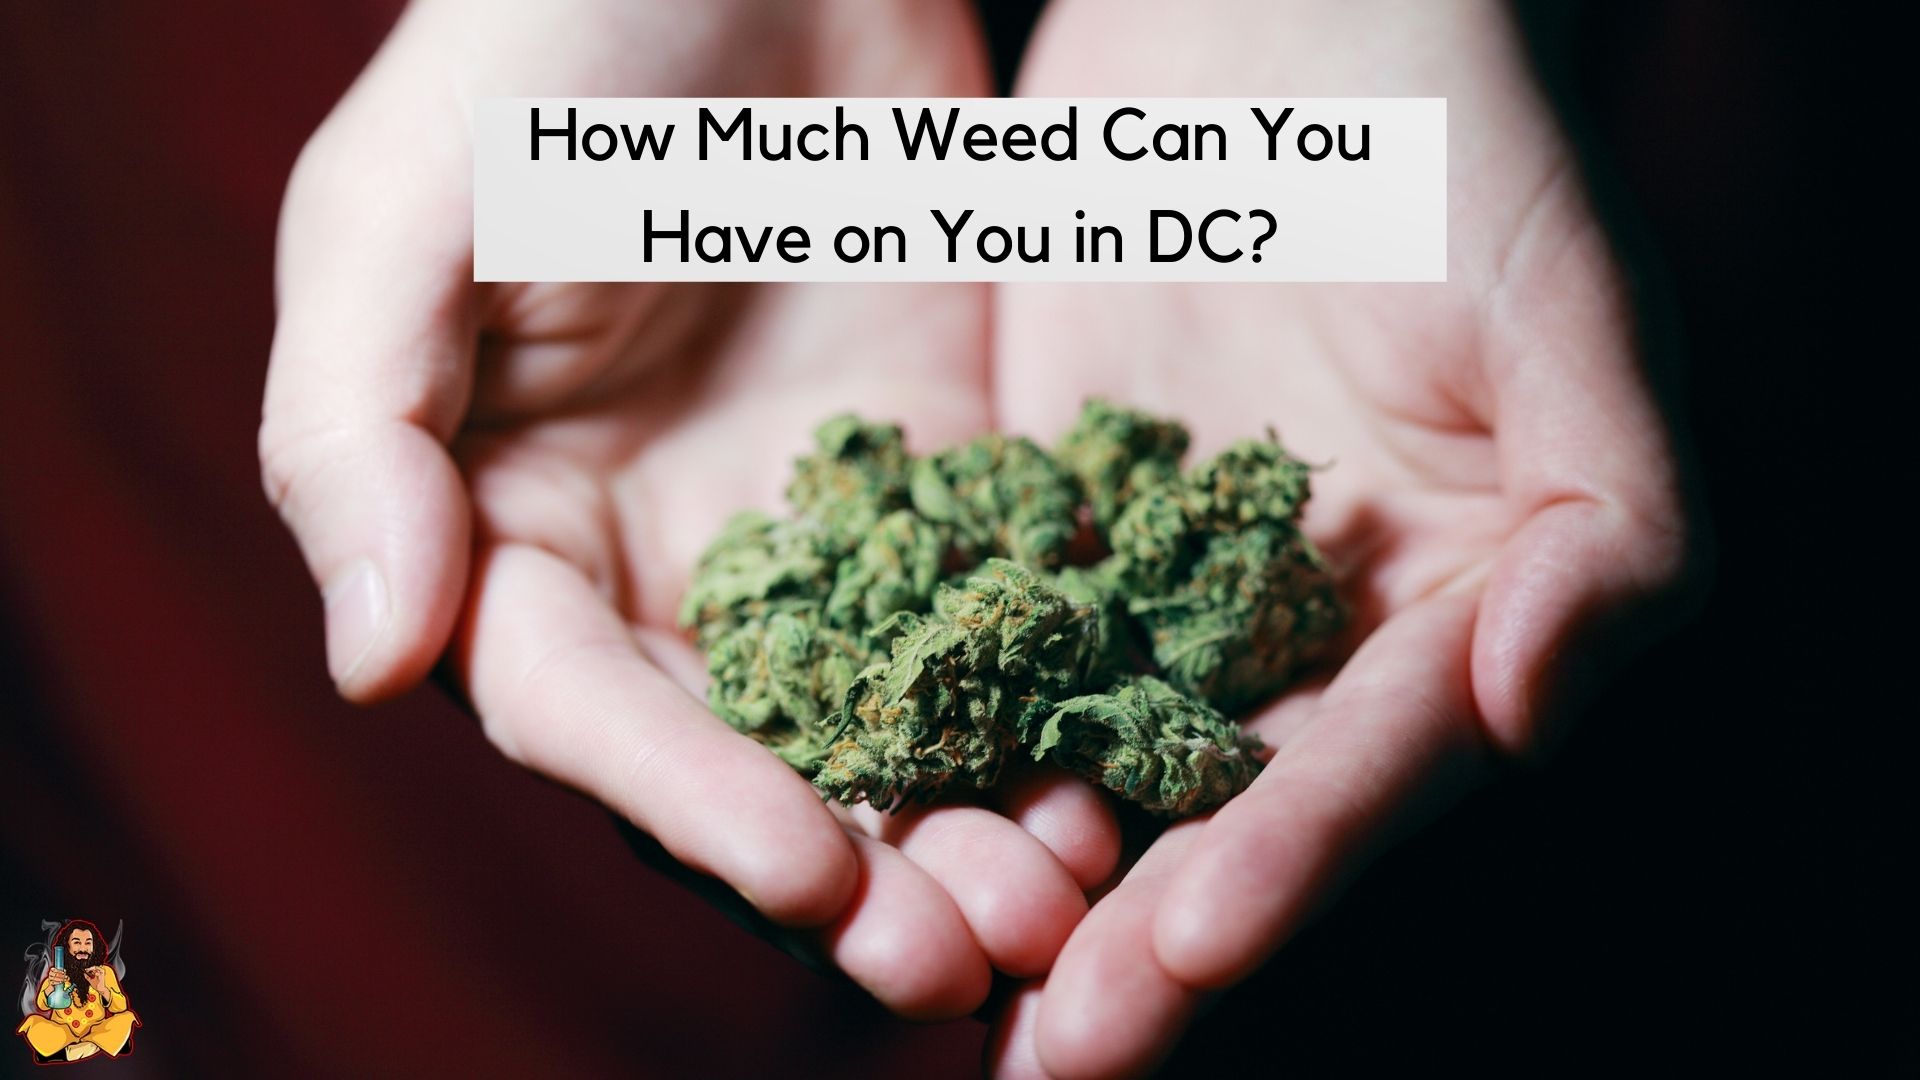 How Much Weed Can You Have in DC?